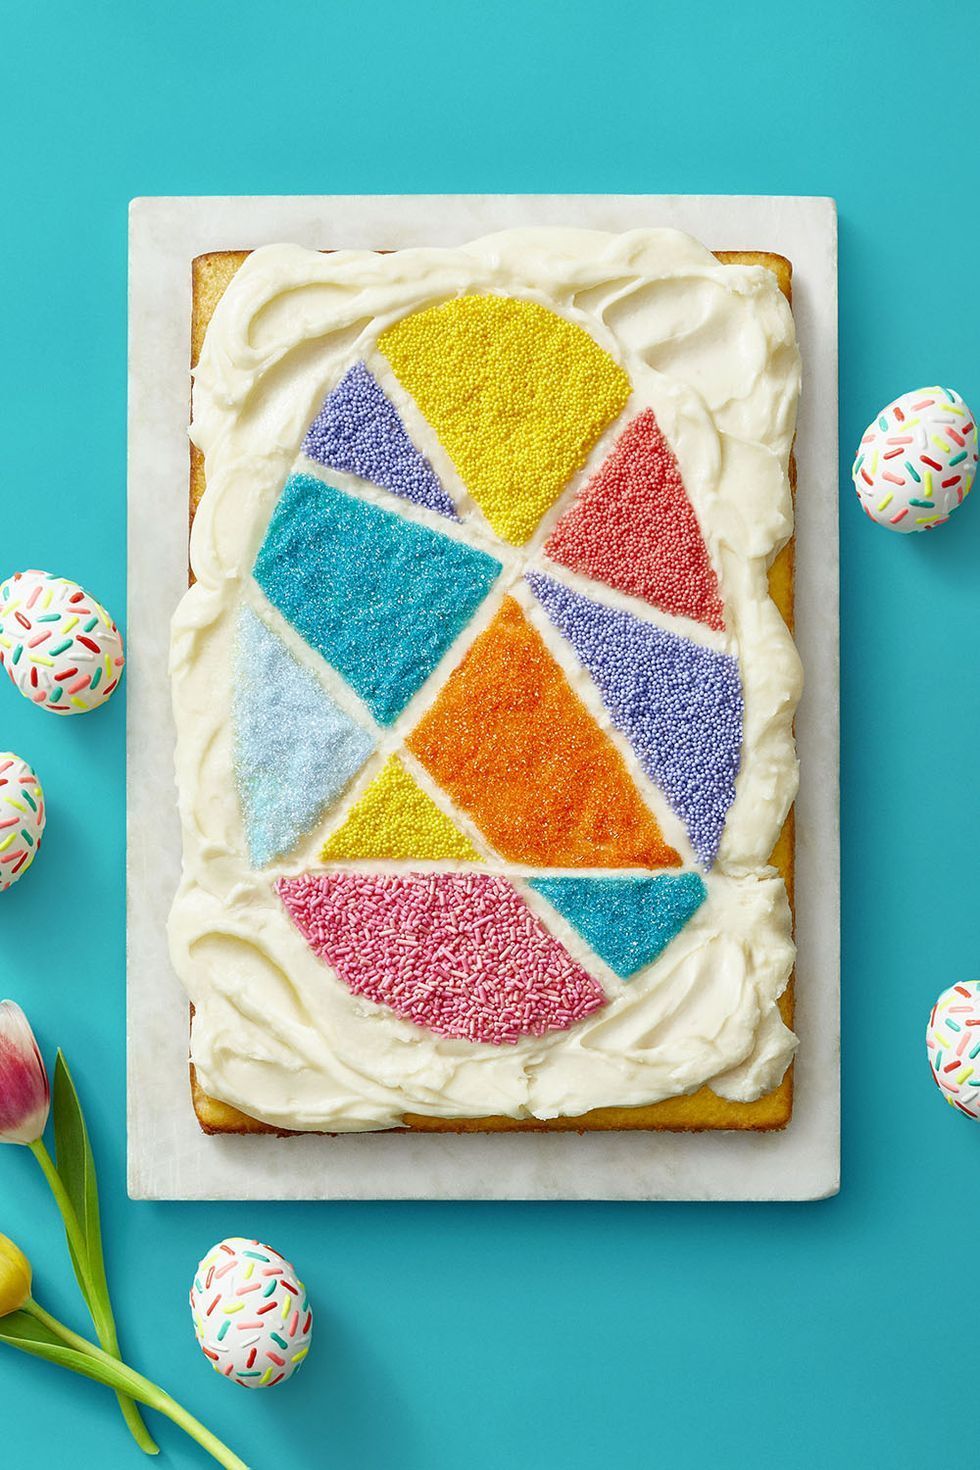 50 Best Easter Cake Recipes — Easy Ideas for Decorating Easter Cakes